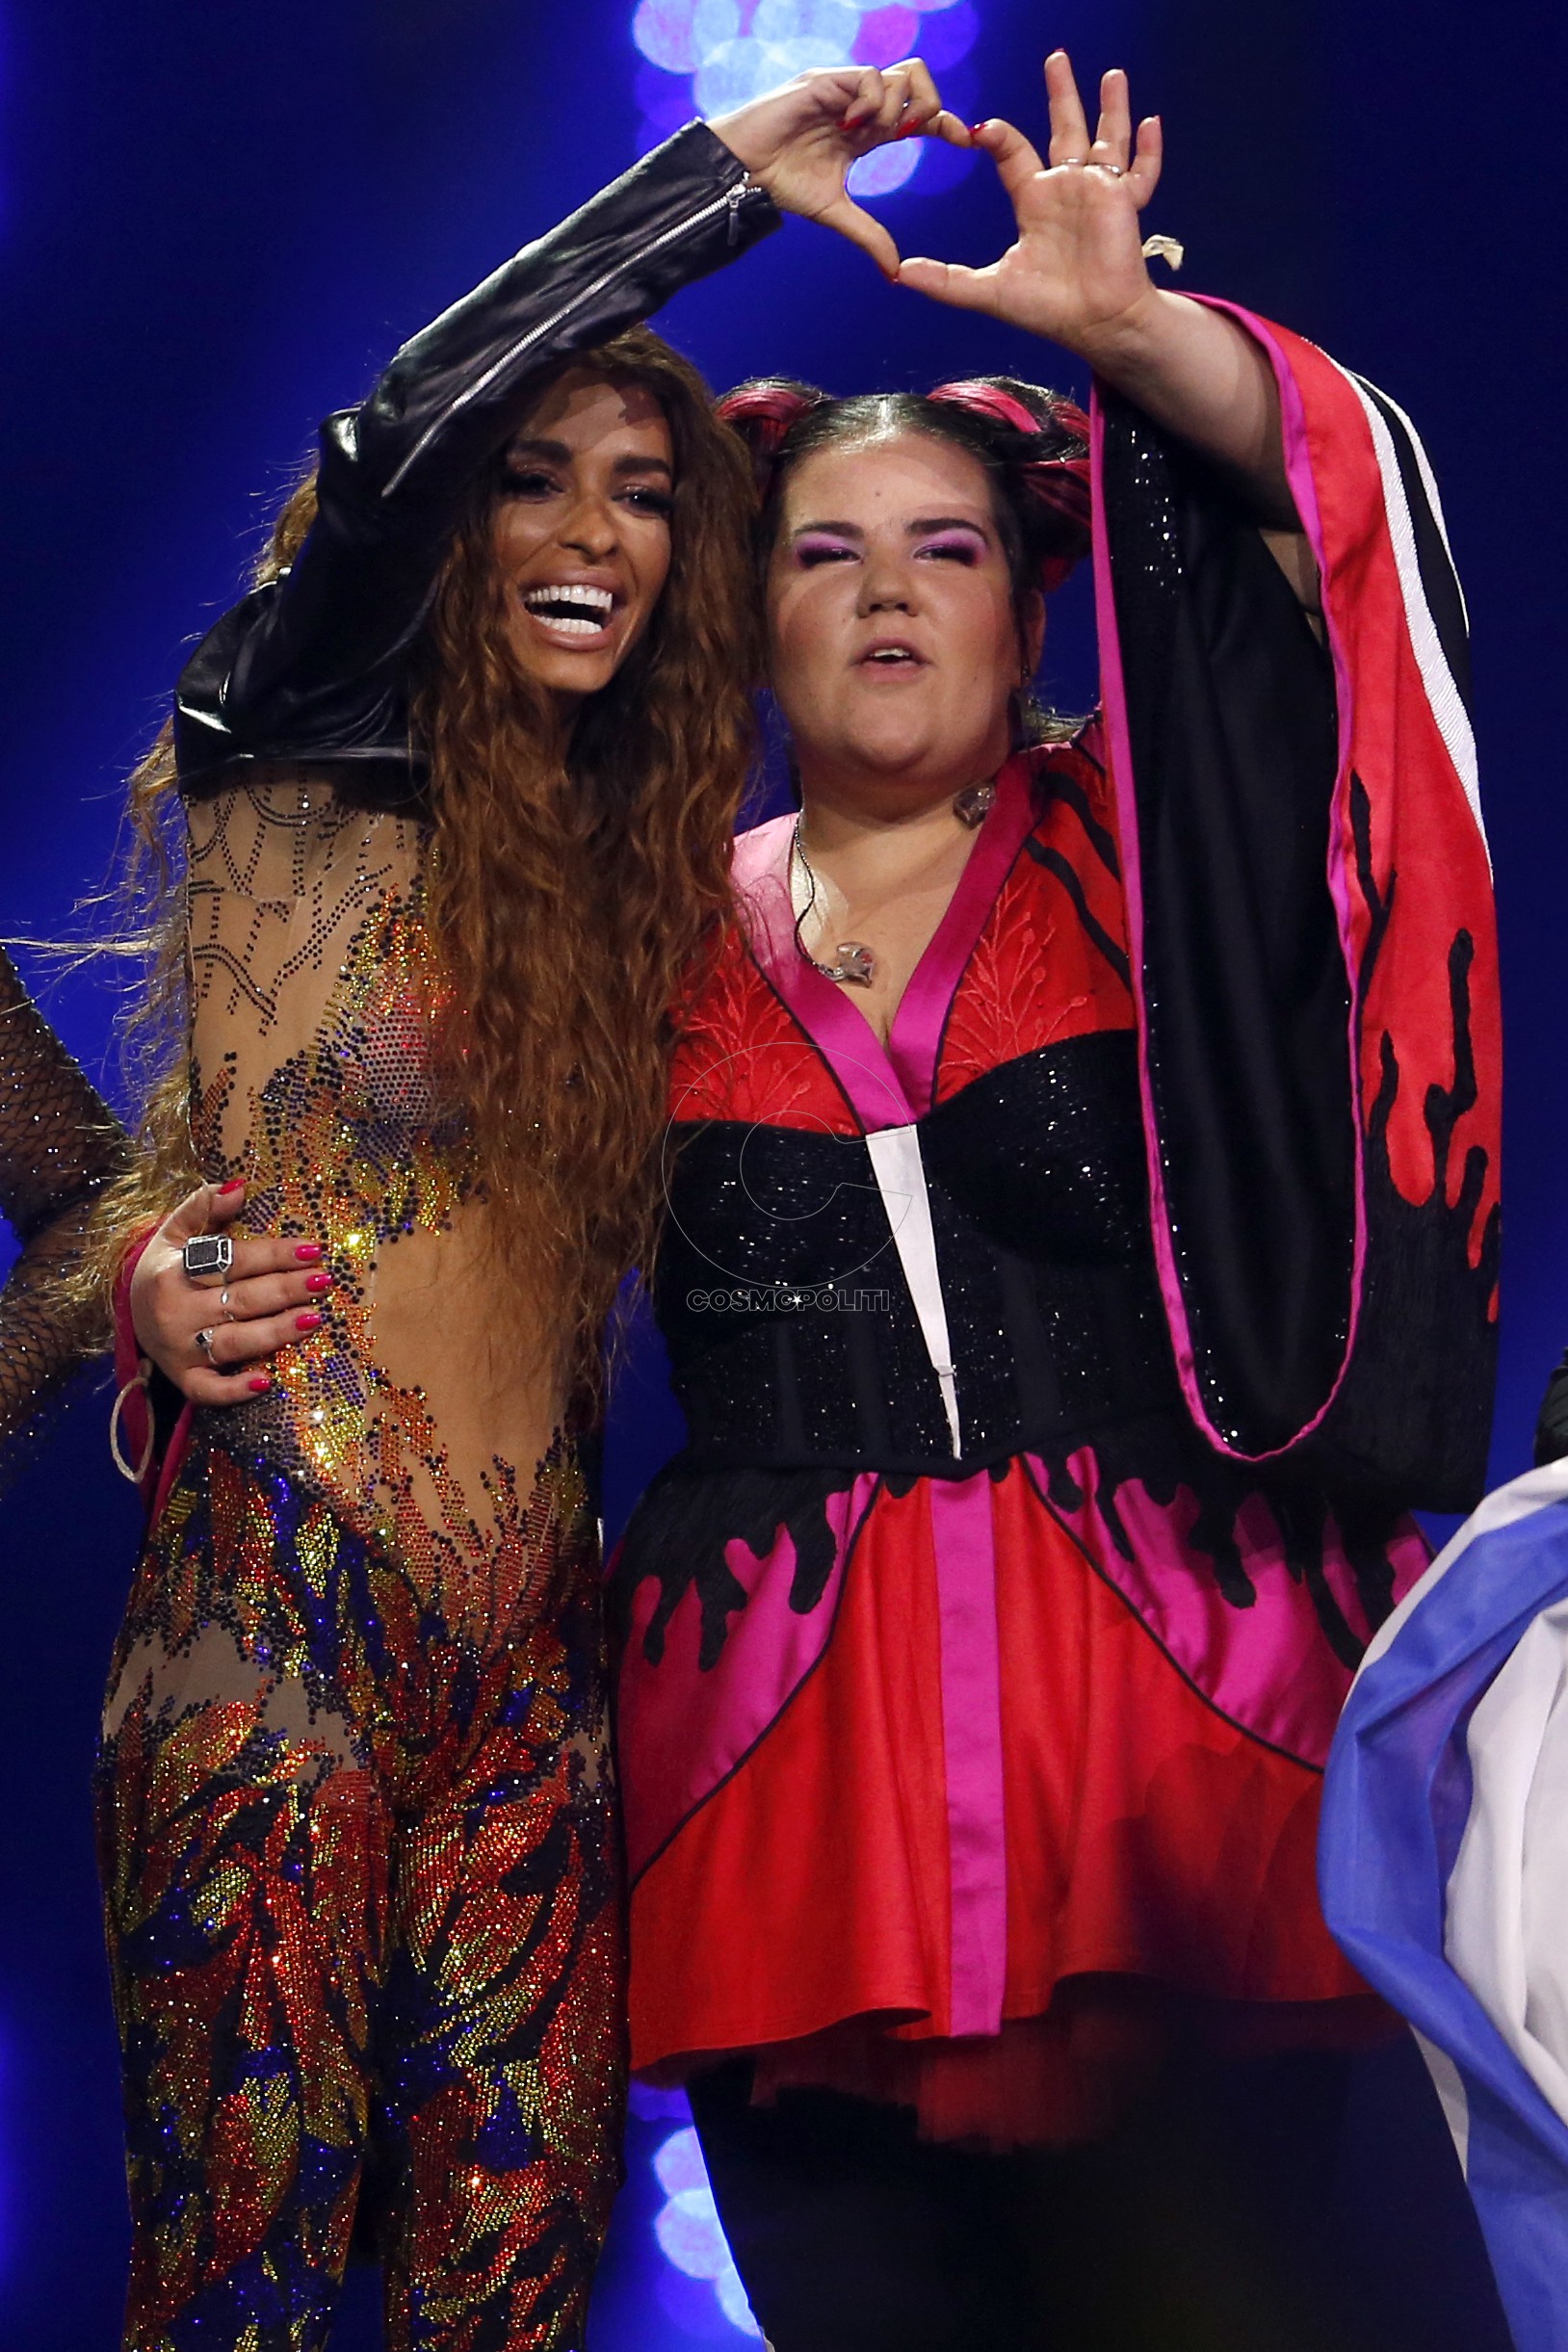 Cyprus’s Eleni Foureira and Israel’s Netta react after the Semi-Final 1 for Eurovision Song Contest 2018 at the Altice Arena hall in Lisbon, Portugal, May 8, 2018. REUTERS/Pedro Nunes